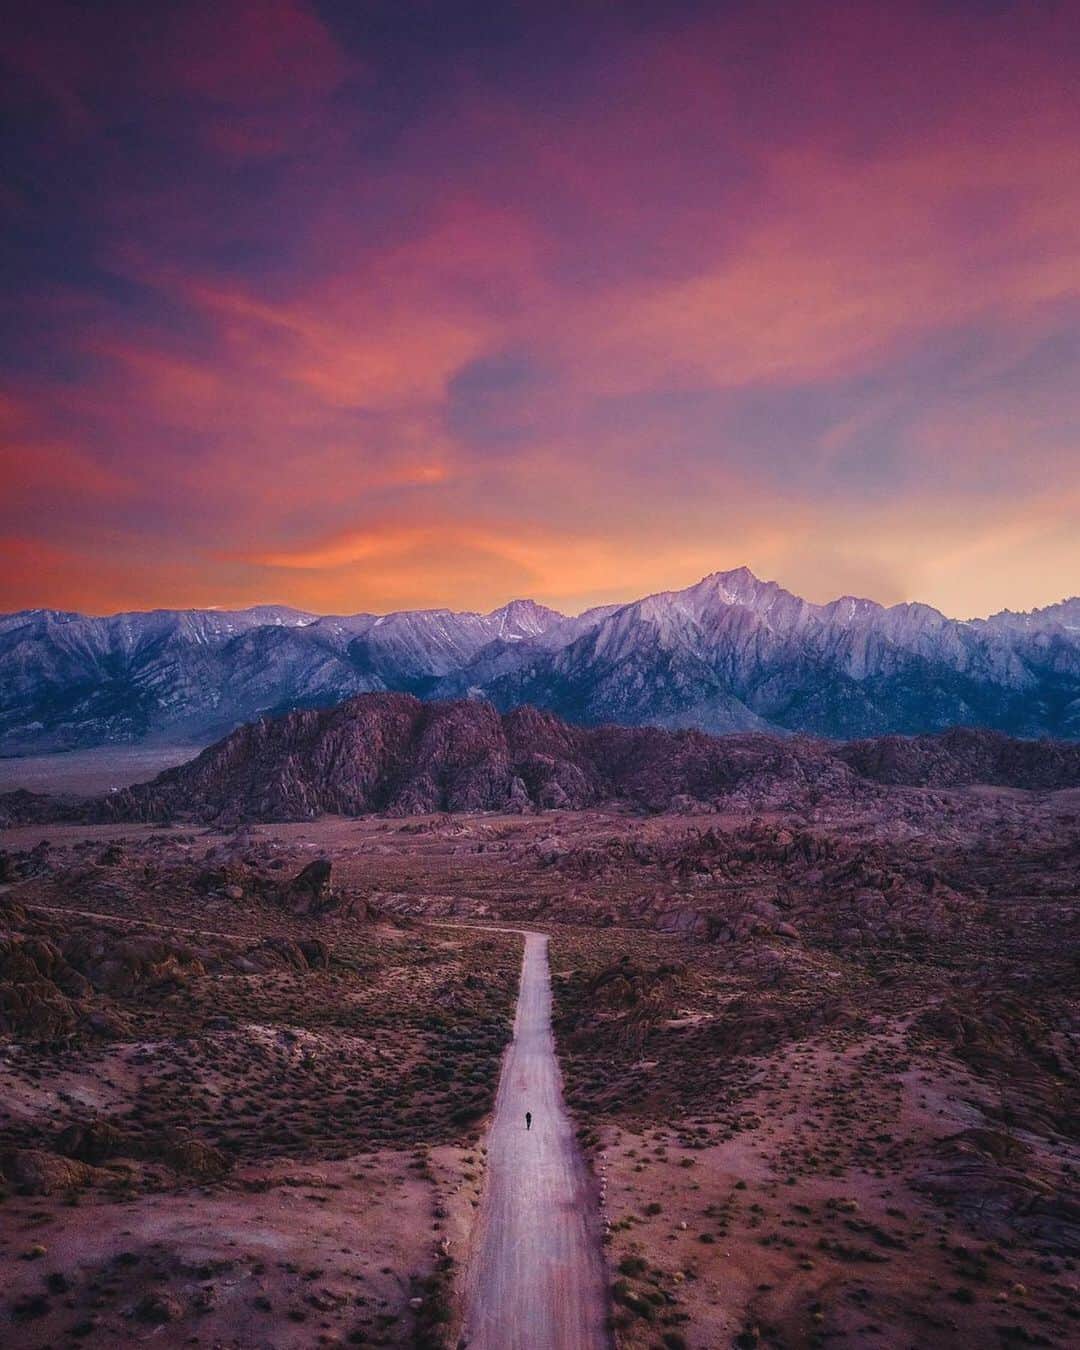 instagoodのインスタグラム：「Welcome back to @RanzNav’s takeover of the day. This image was taken at my favorite stop along highway 395 in Lone Pine, California, USA. I’ve taken so many shots of this road but this is my first time using a drone to give it a whole different perspective. I got lucky and the burn was ridiculously beautiful at sunset. Swipe for another favorite drone shot of a place called Shiprock in New Mexico, USA. It’s crazy how a drone perspective changes the game by giving you an amazing bird’s eyeview from up above.」